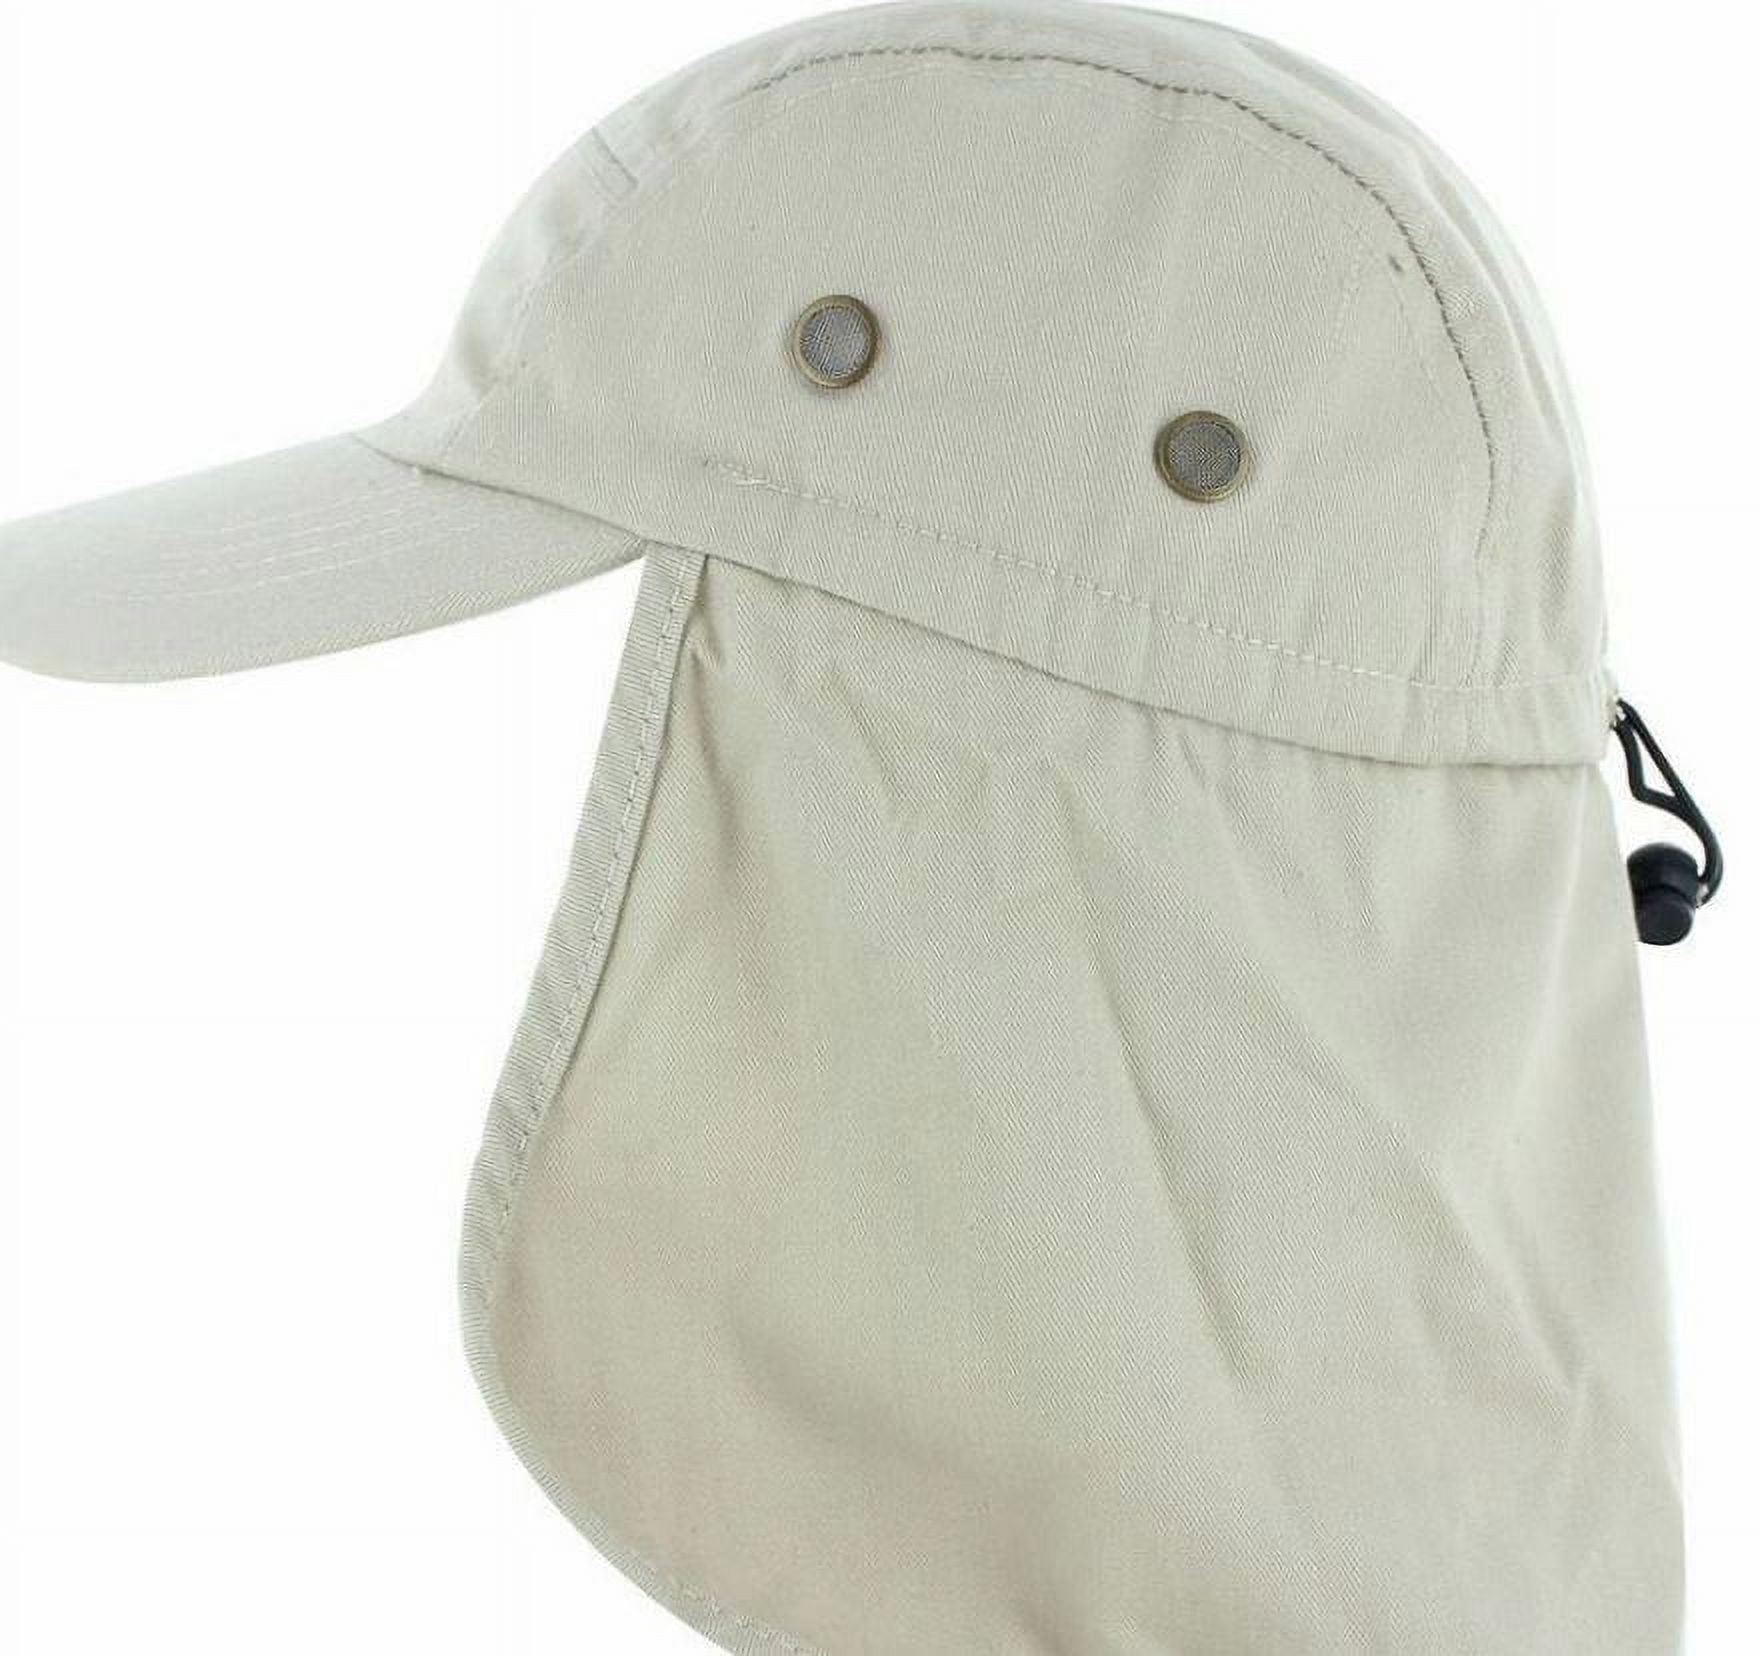 Fishing Boating Hiking Army Military Snap Brim Cap With Ear and Neck Flap  Hat (Beige)